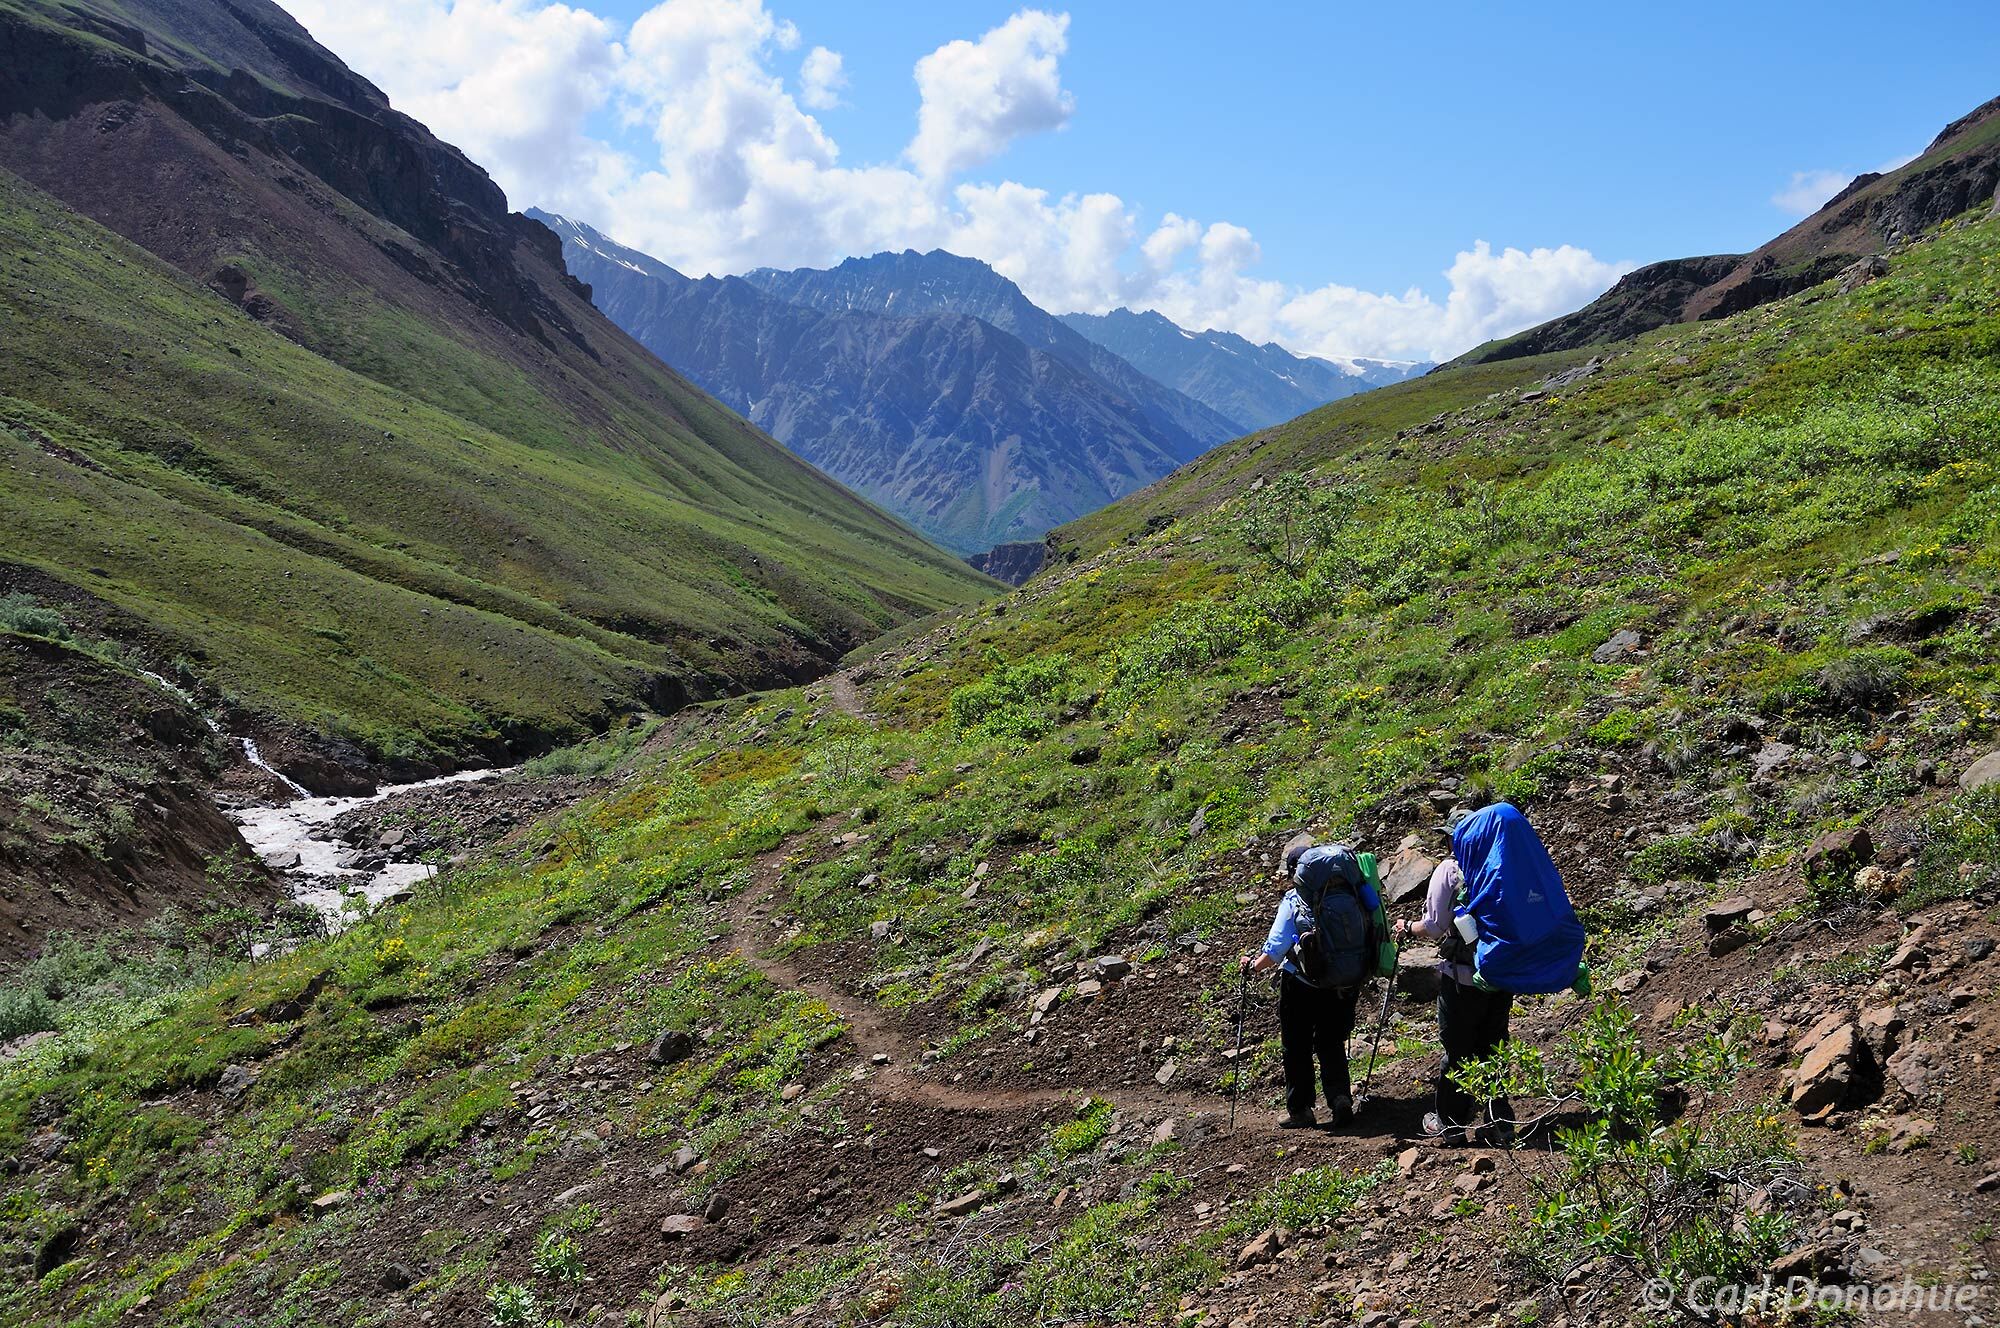 Backpacking down the Goat Trail, Chitistone Canyon, Wrangell - St. Elias National Park and Preserve, Alaska.